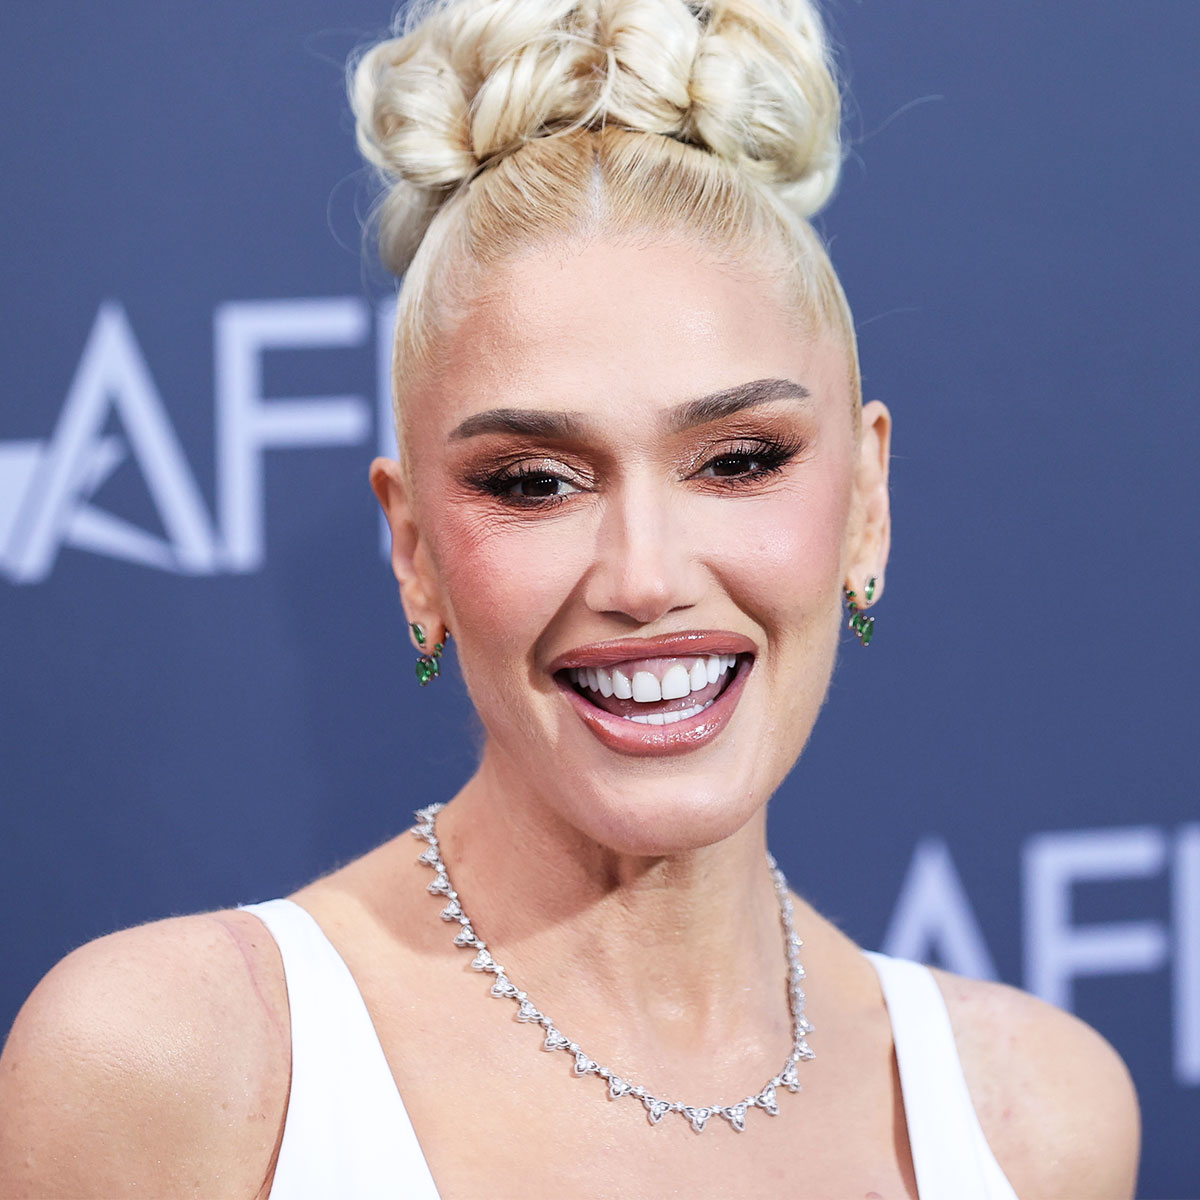 Gwen Stefani wows in pink dress and tights after 'unrecognisable